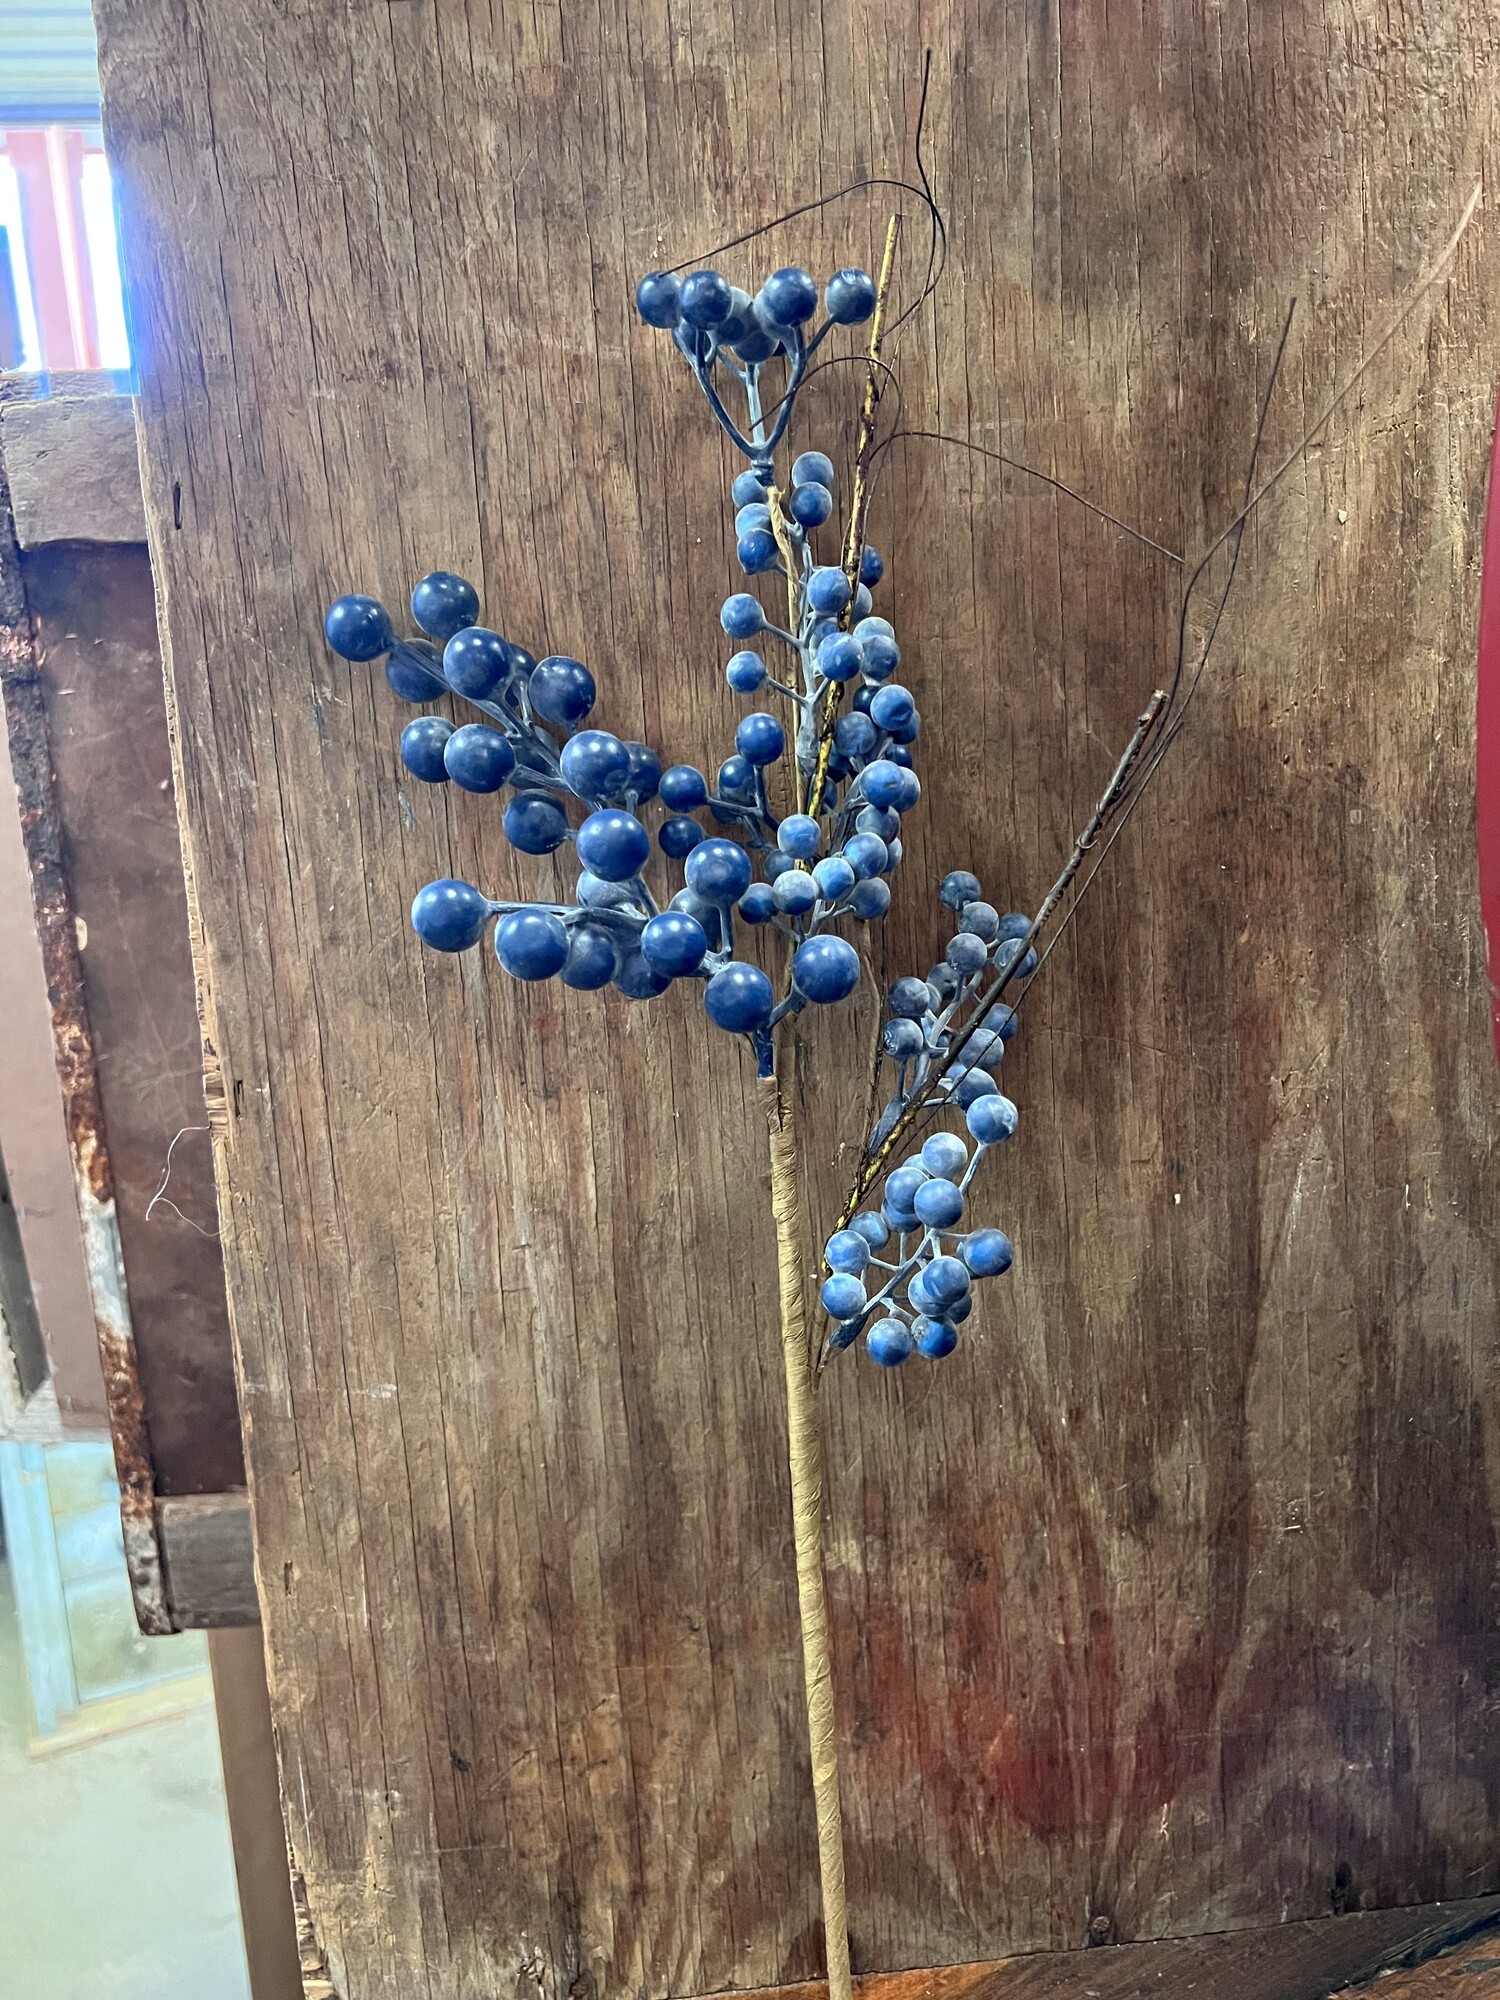 Gorgeous Blueberry stem that looks like real blueberries. This stem is beautiful on its own or pair it with any floral arraingment.  Would be pretty tucked into a flocked Chrstmas tree or paired with lemon stems.
Stem is 22 inches in length with a few twigs for that perfect look. Stem is wrapped in brown floral paper